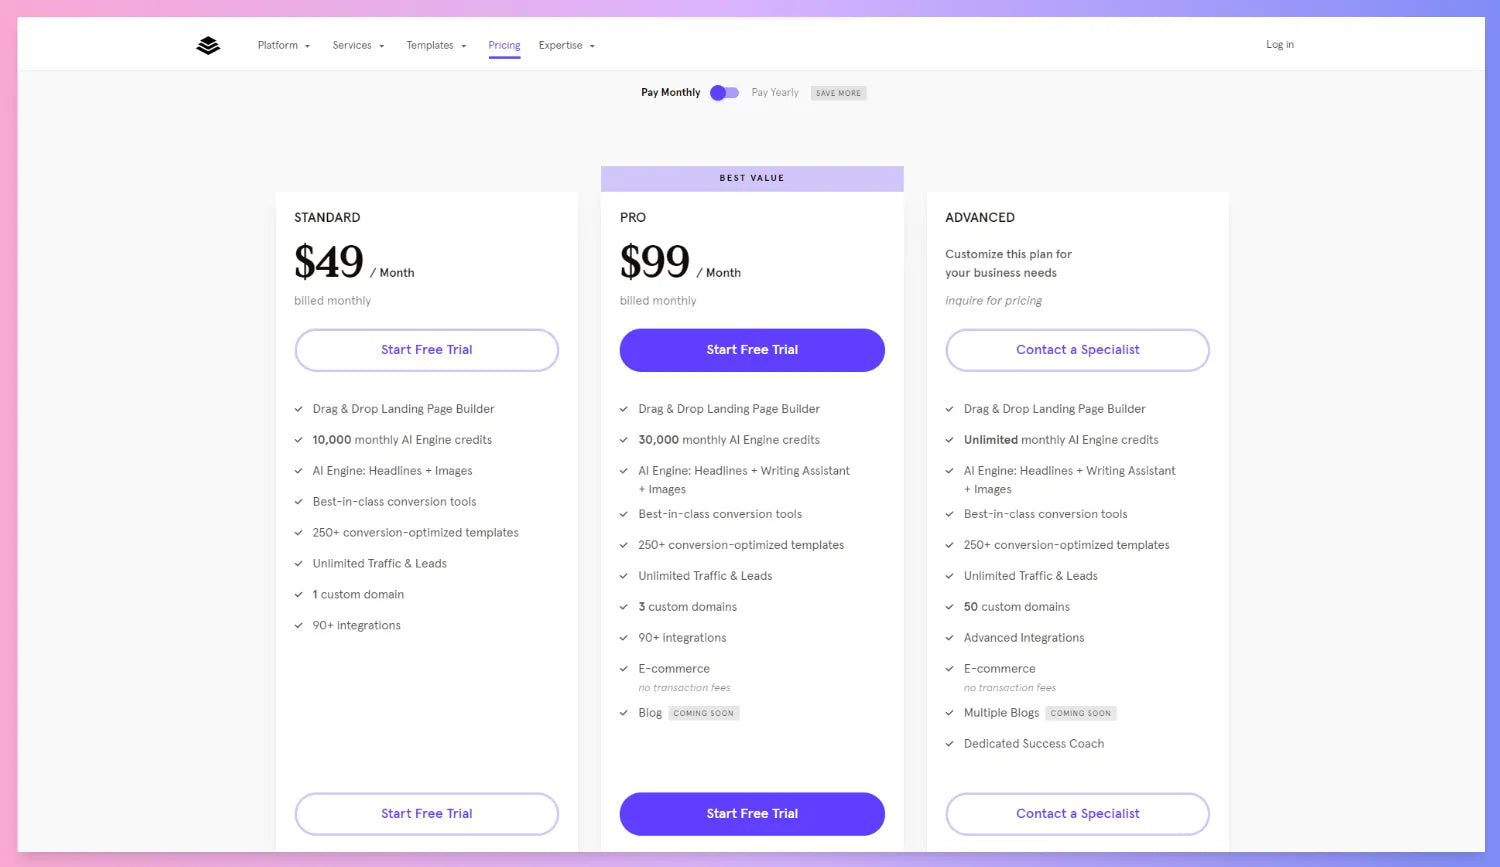 Leadpages’ pricing plans